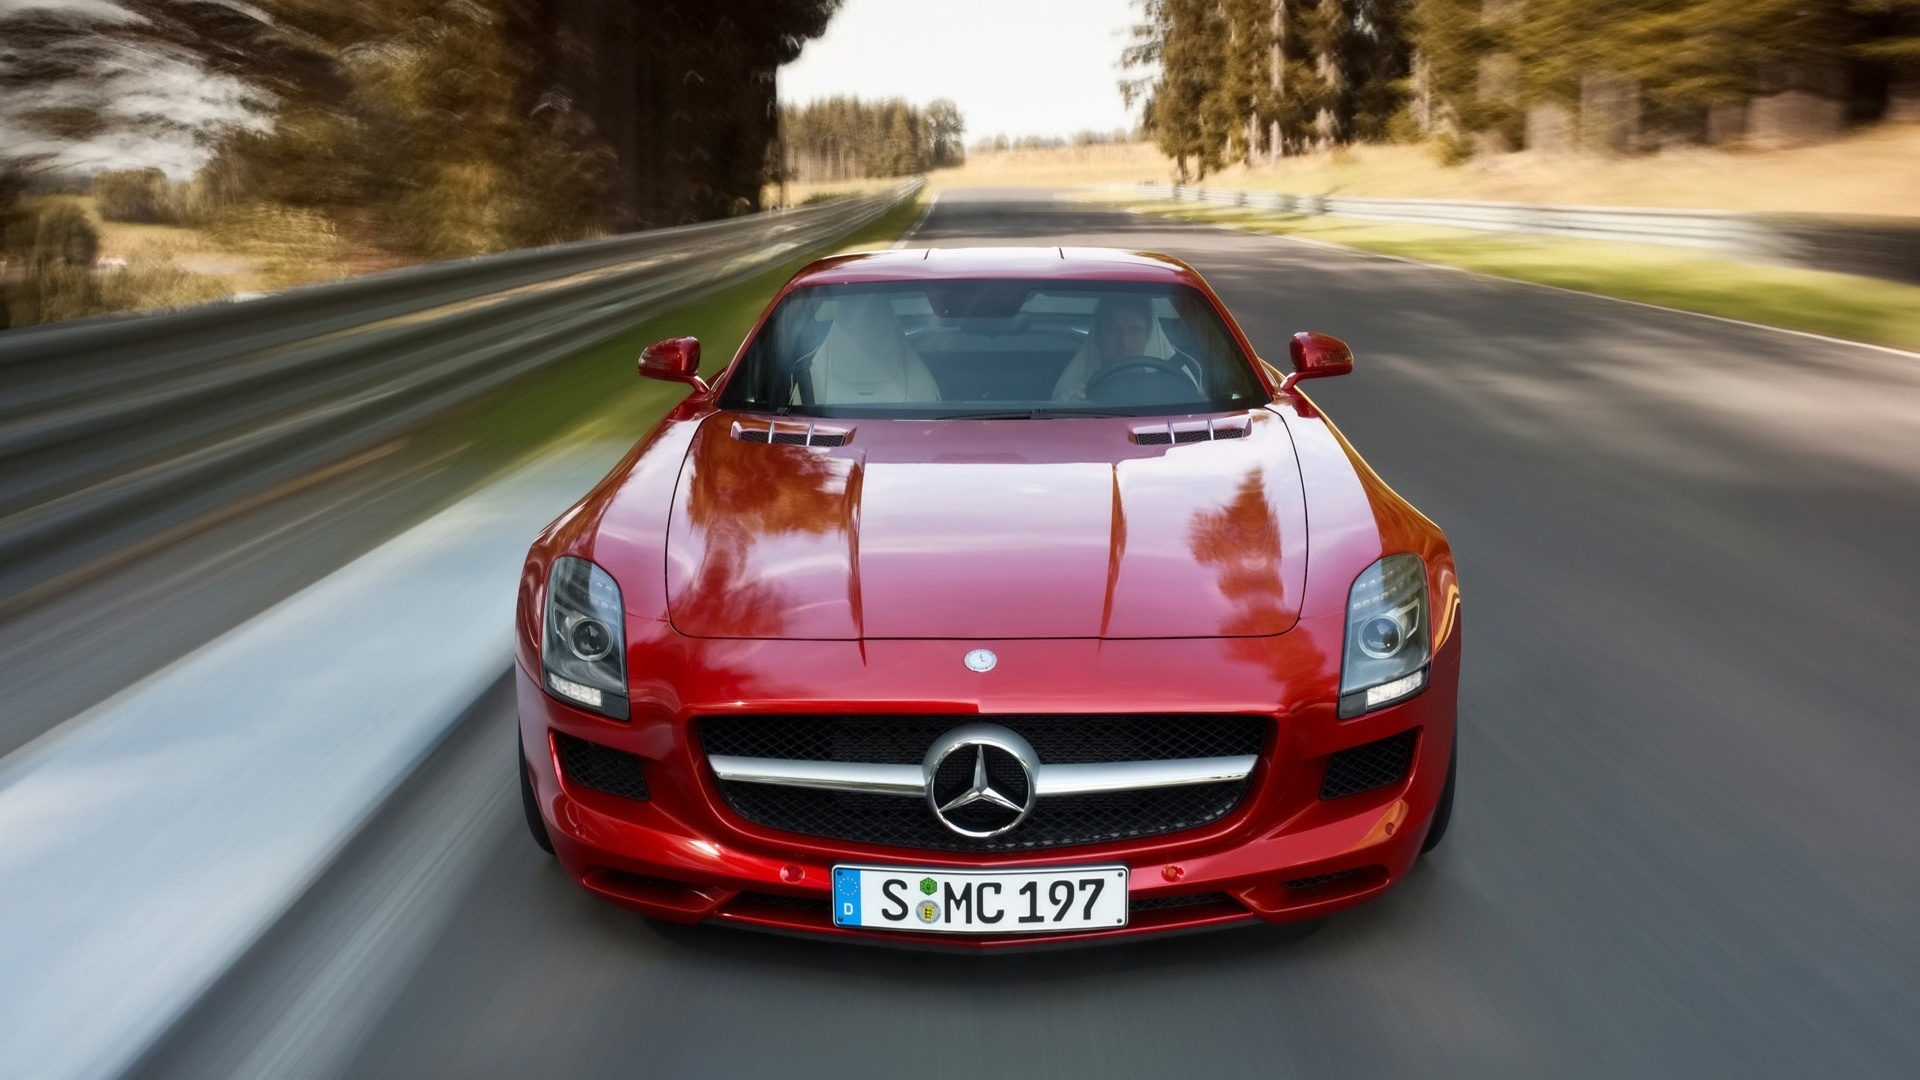 Mercedes Benz SLS AMG Red 2010 for 1920 x 1080 HDTV 1080p resolution 1920x1080